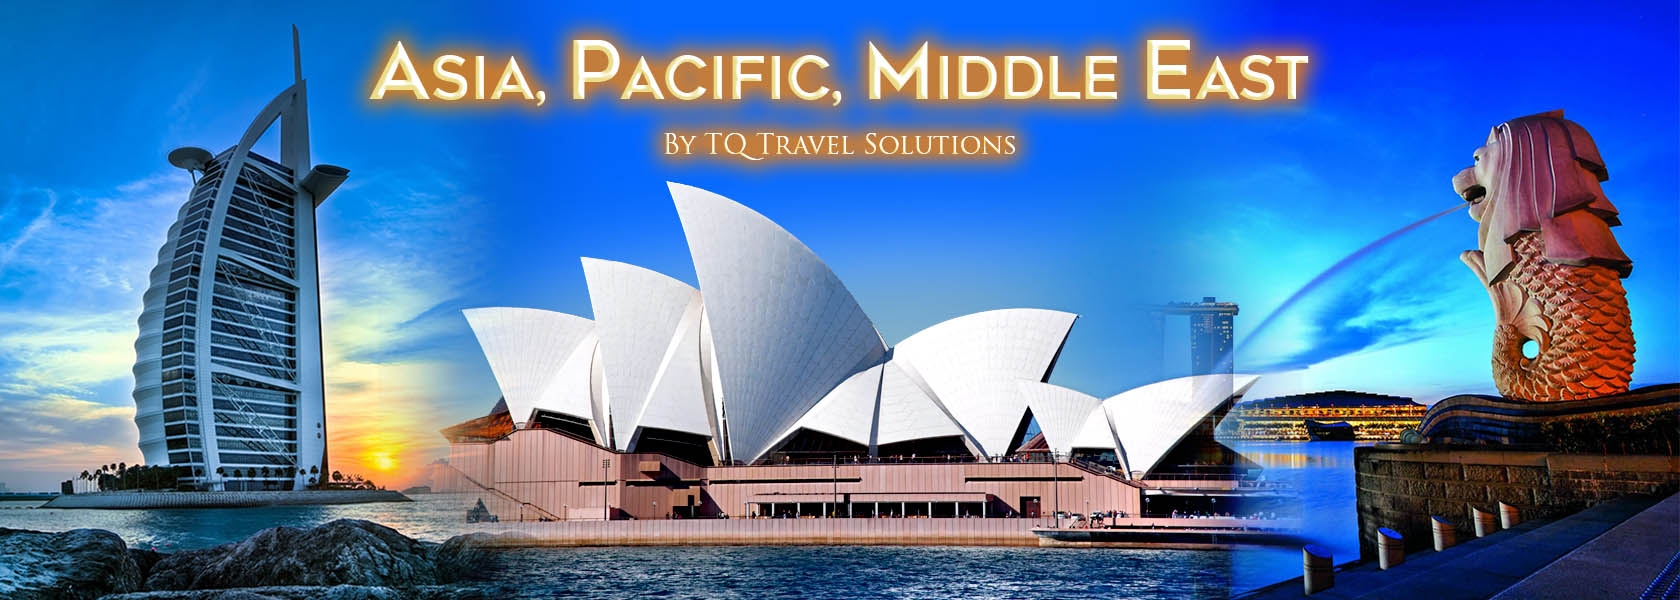 tq travel solutions contact number